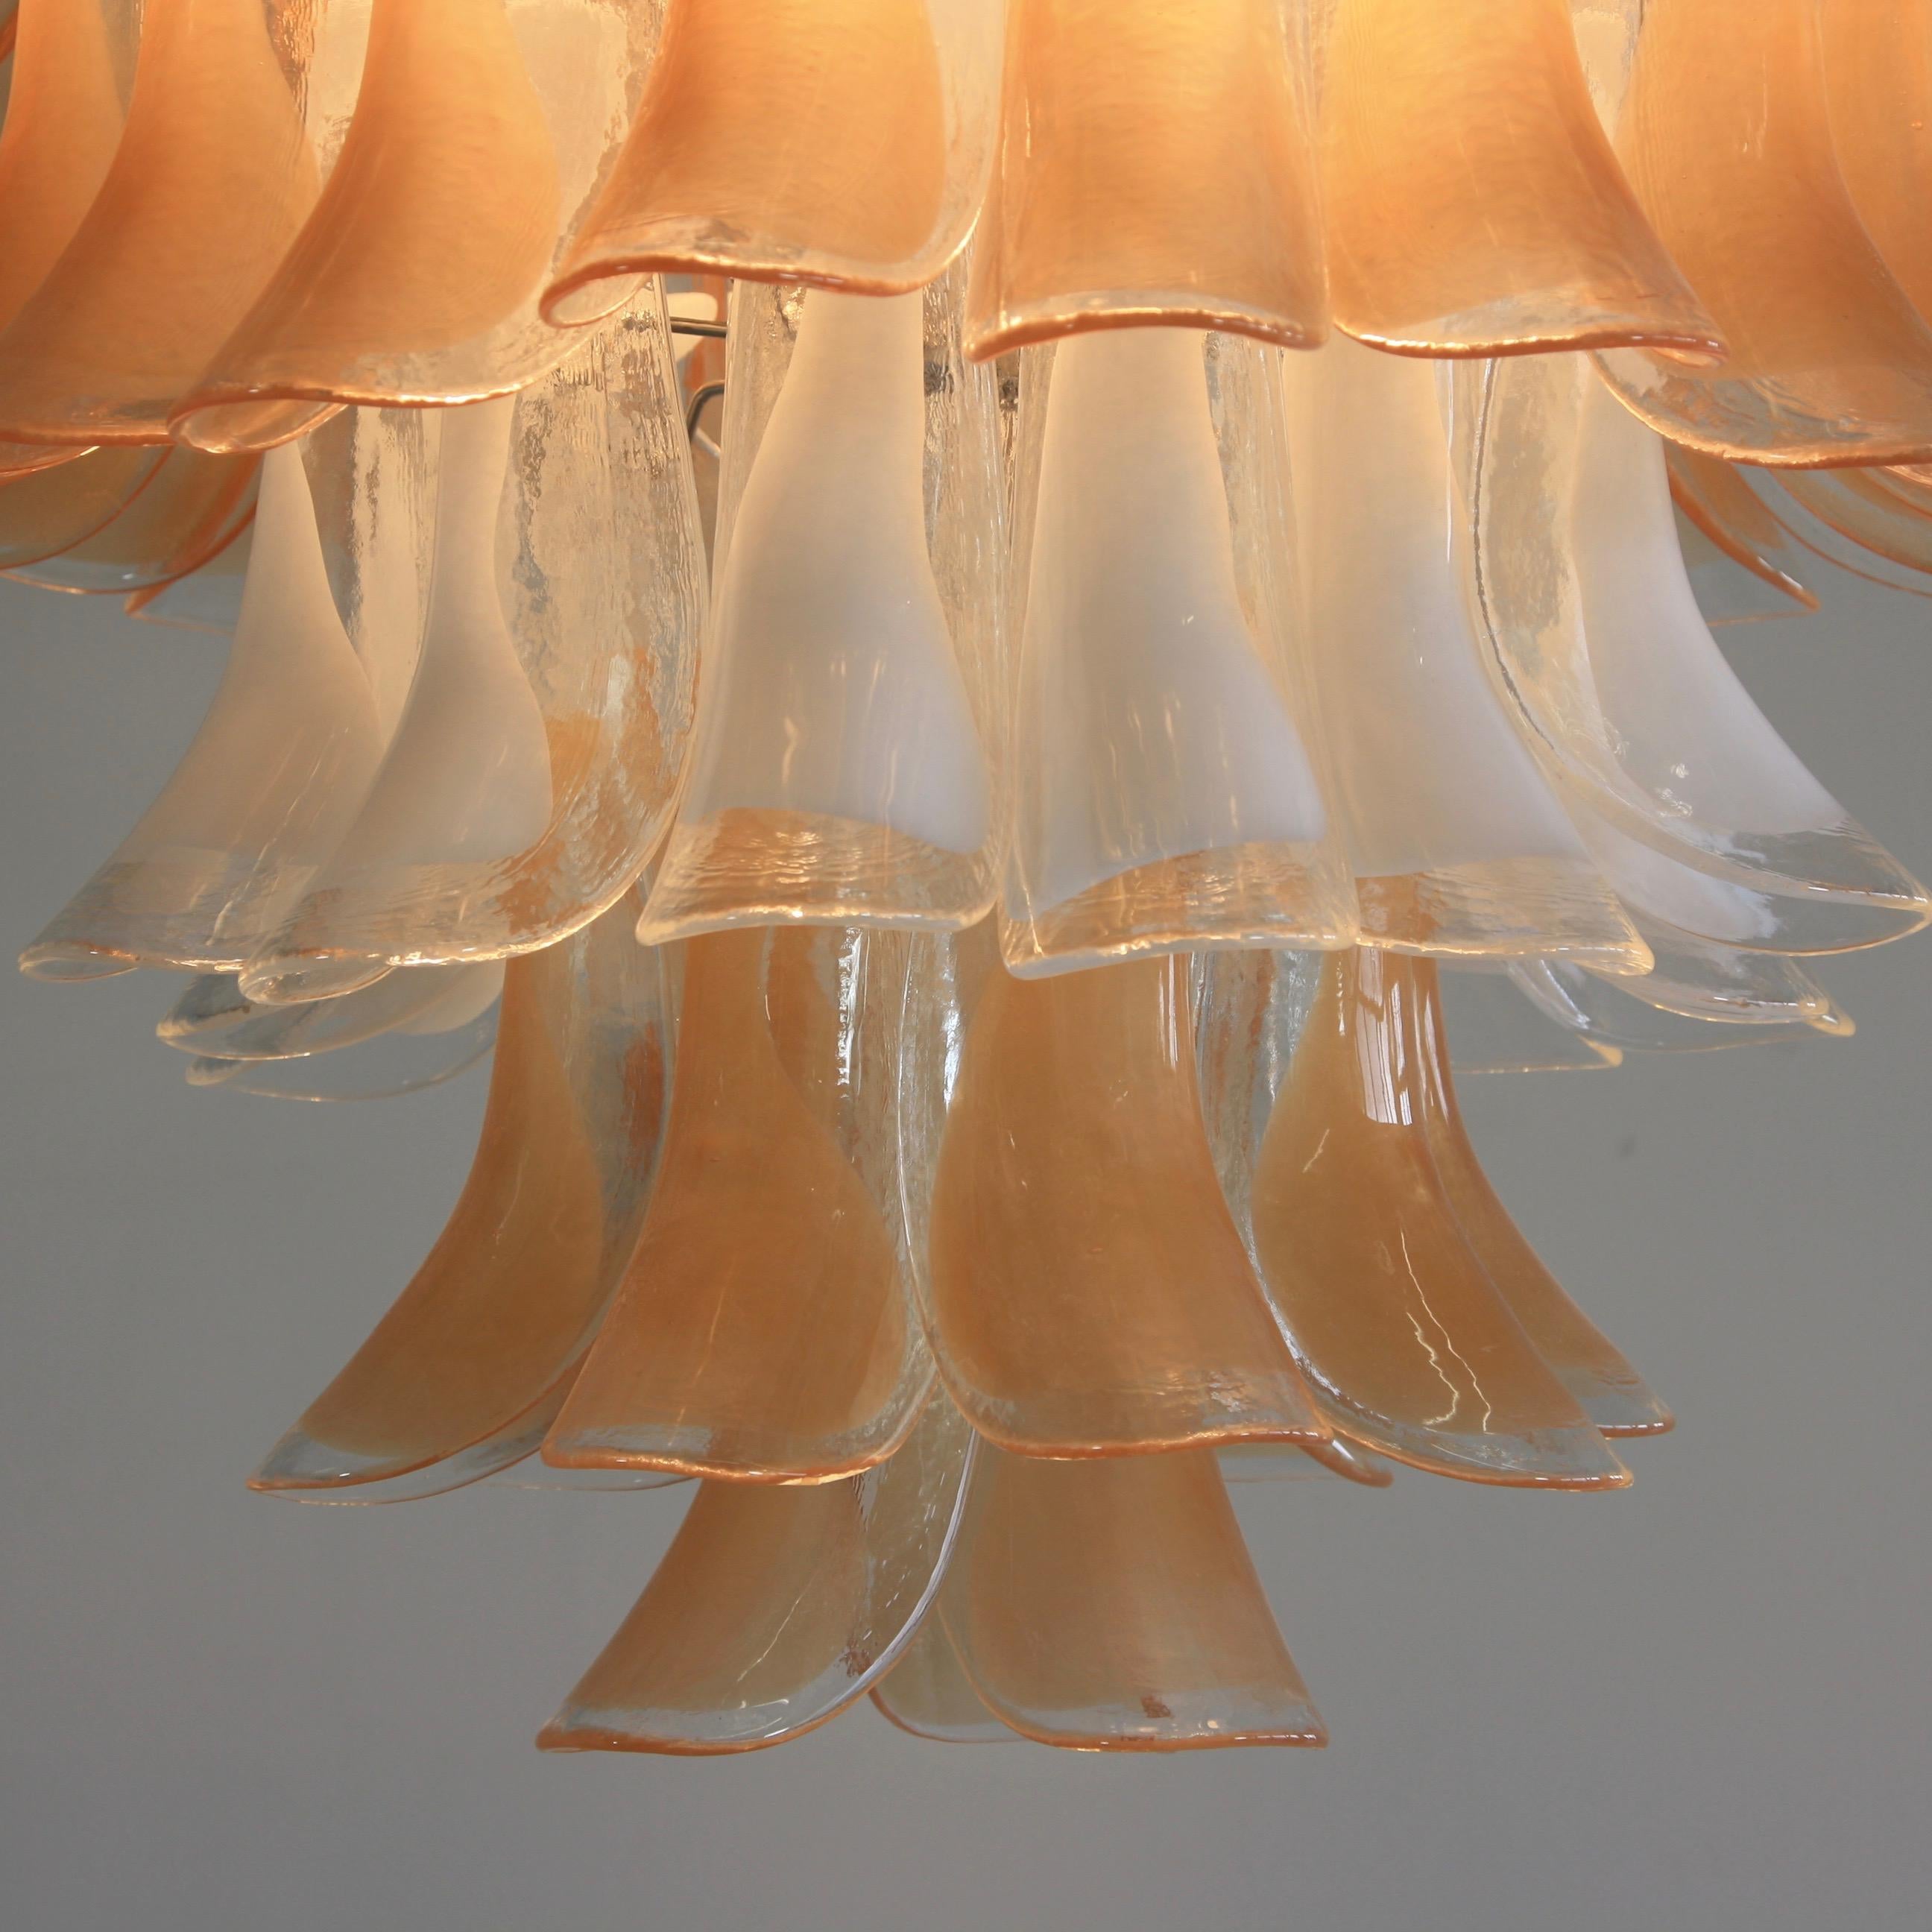 Murano glass 5-tier chandelier with saddle form glass, Italy, Murano, 1980s.

Chrome-plated steel frame with saddle form glass with peach and white coloration. With five light sockets.